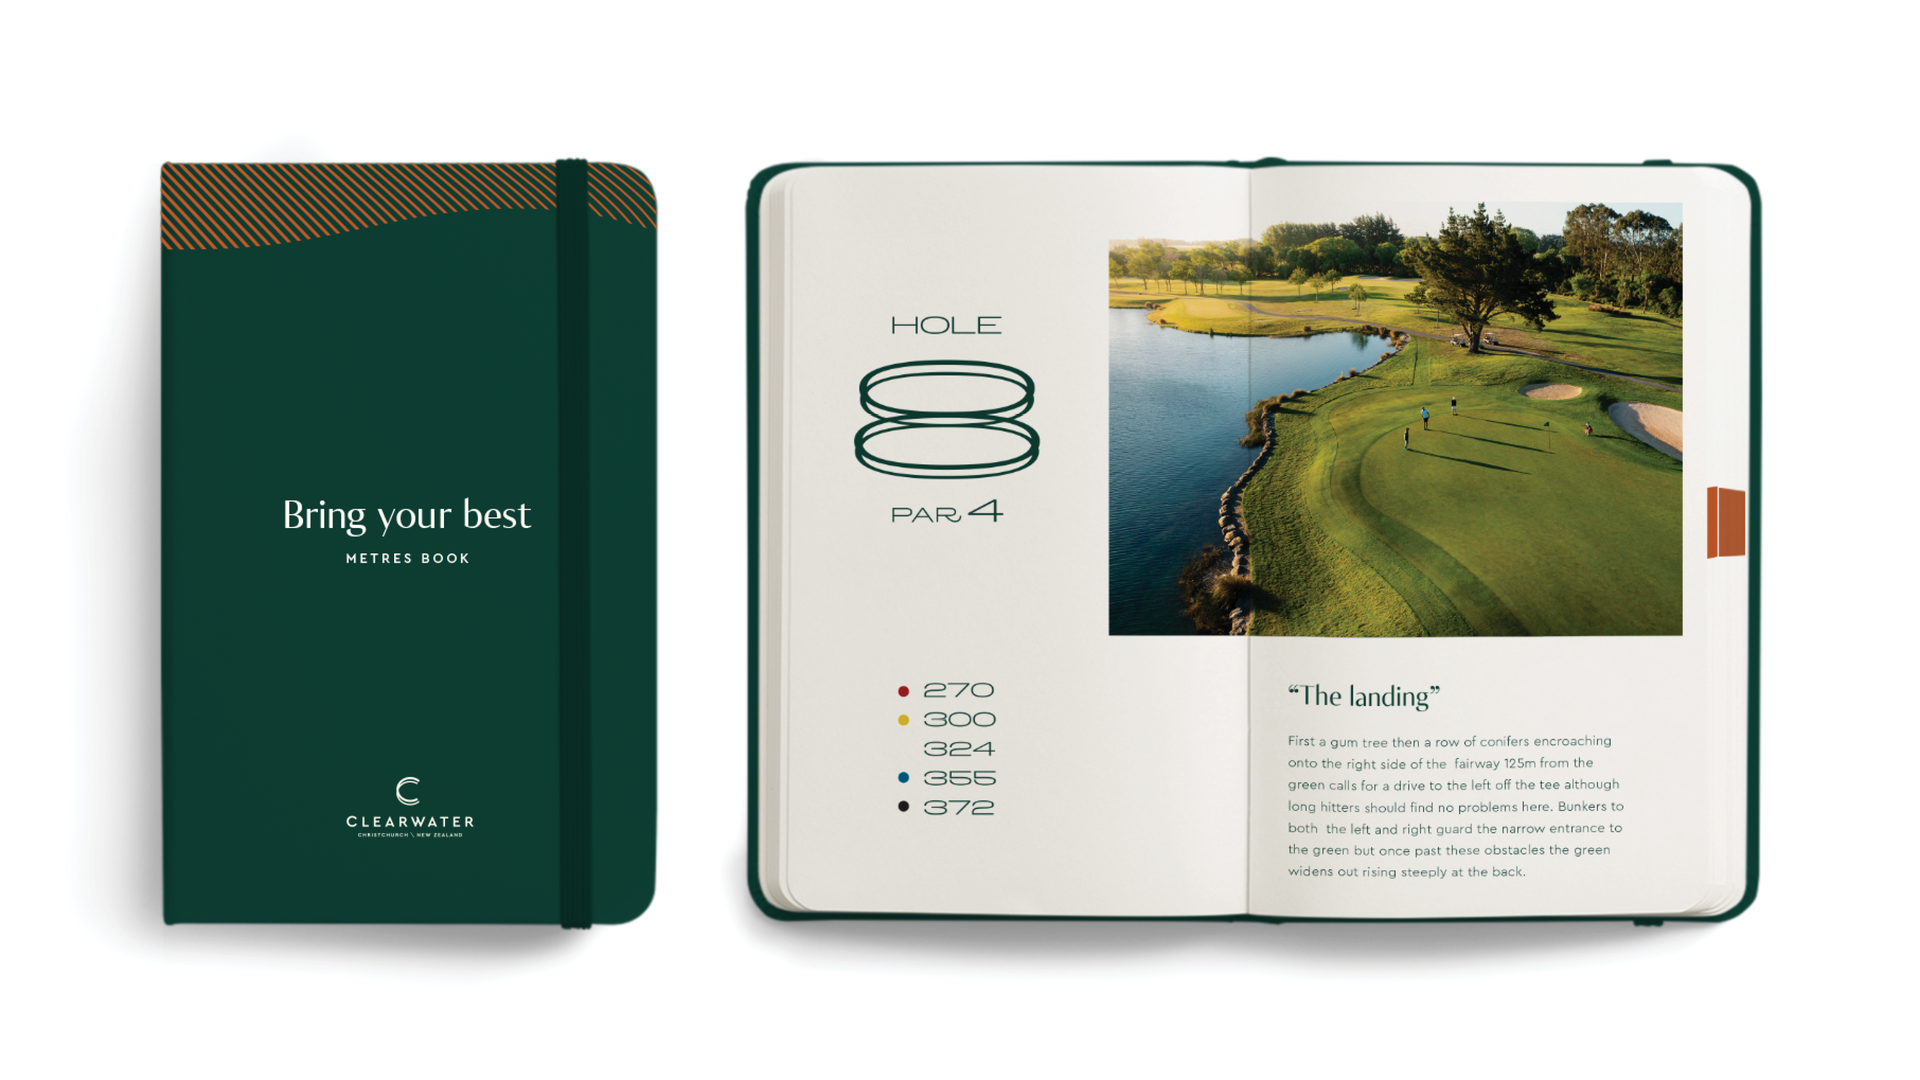 Concept of a Clearwater Golf branded metres book